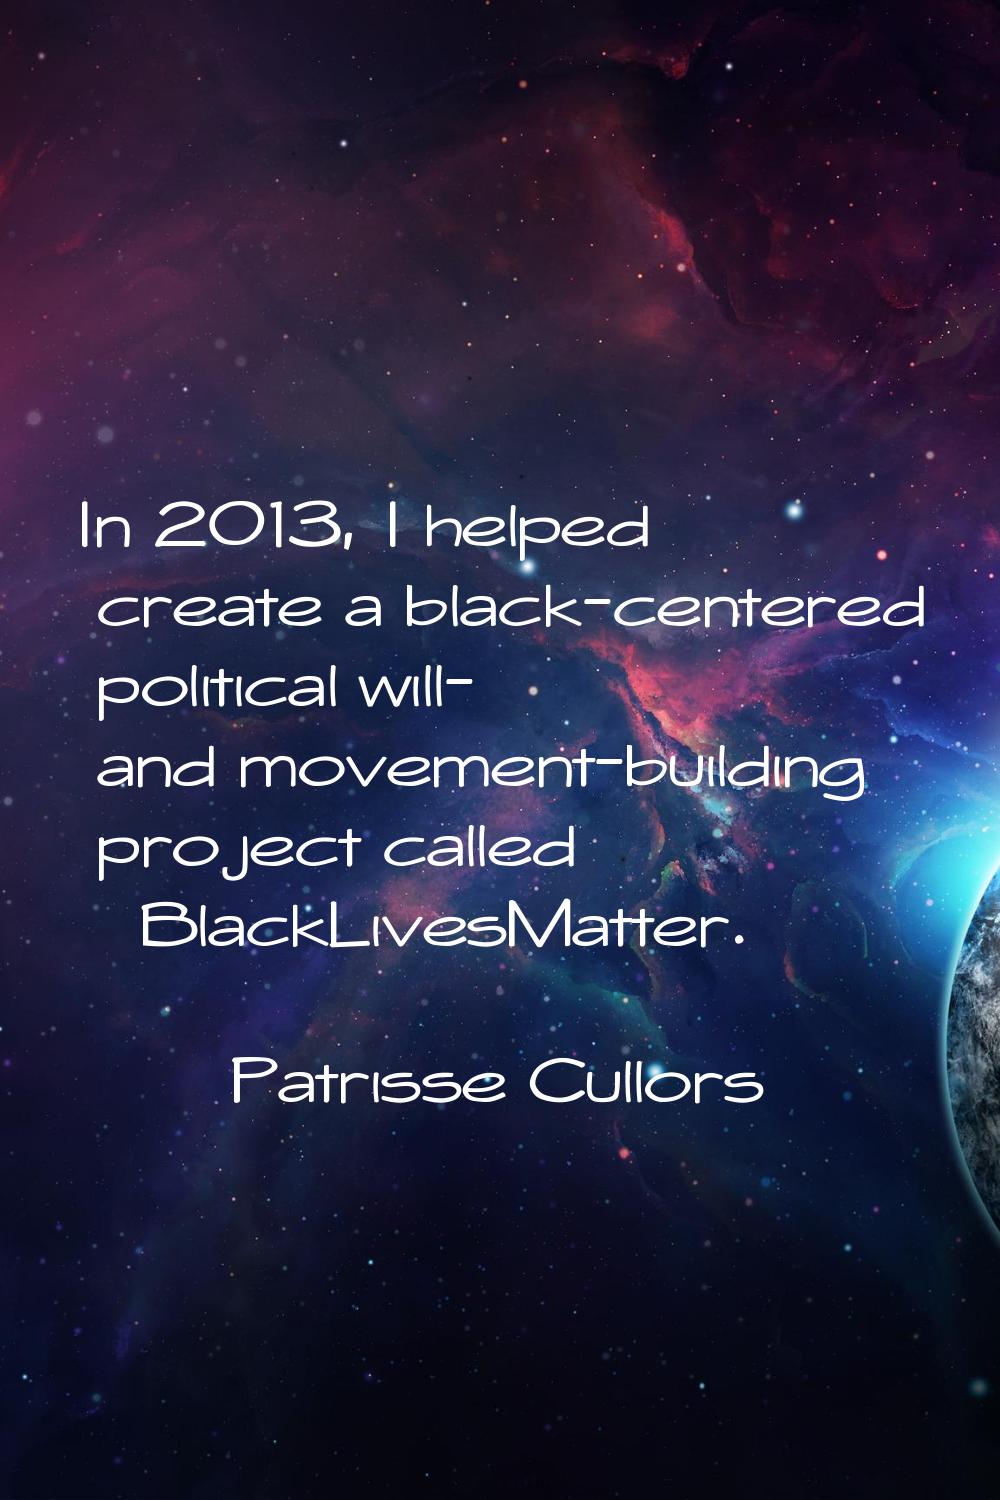 In 2013, I helped create a black-centered political will- and movement-building project called #Bla